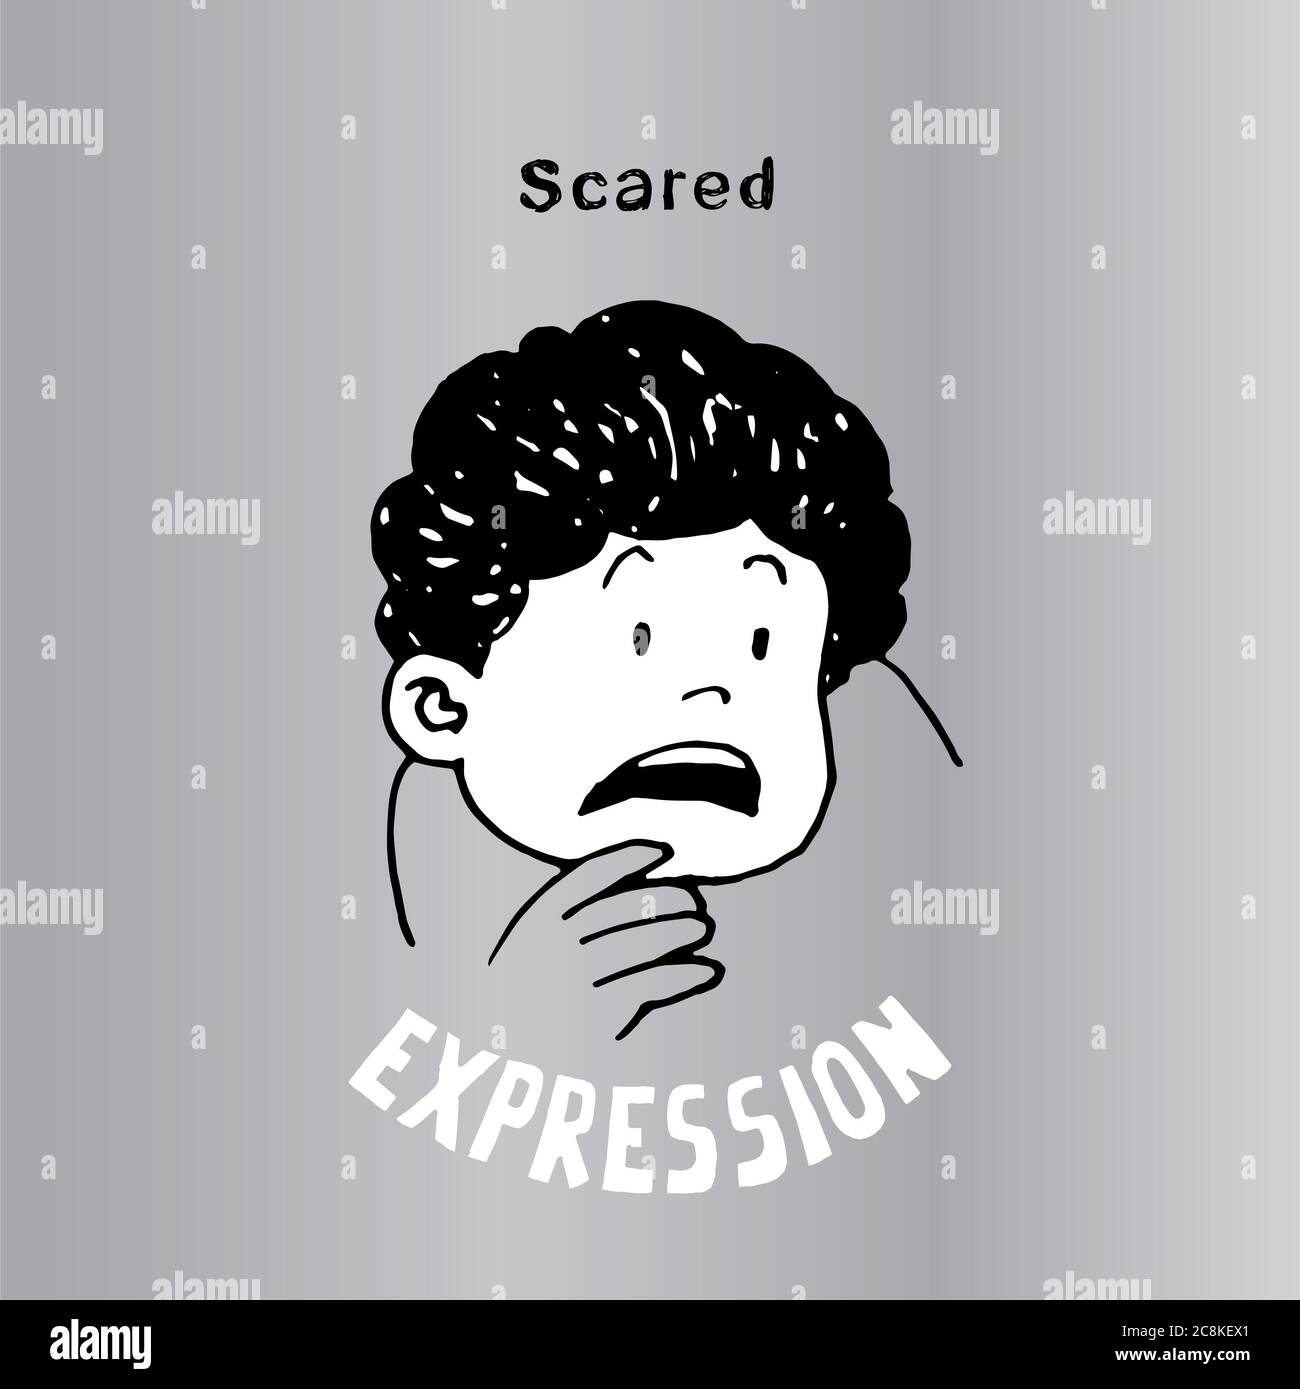 Scared face vector illustration. Interesting Cartoon character of Scared. Used as emoticons and emojis. Stock Photo